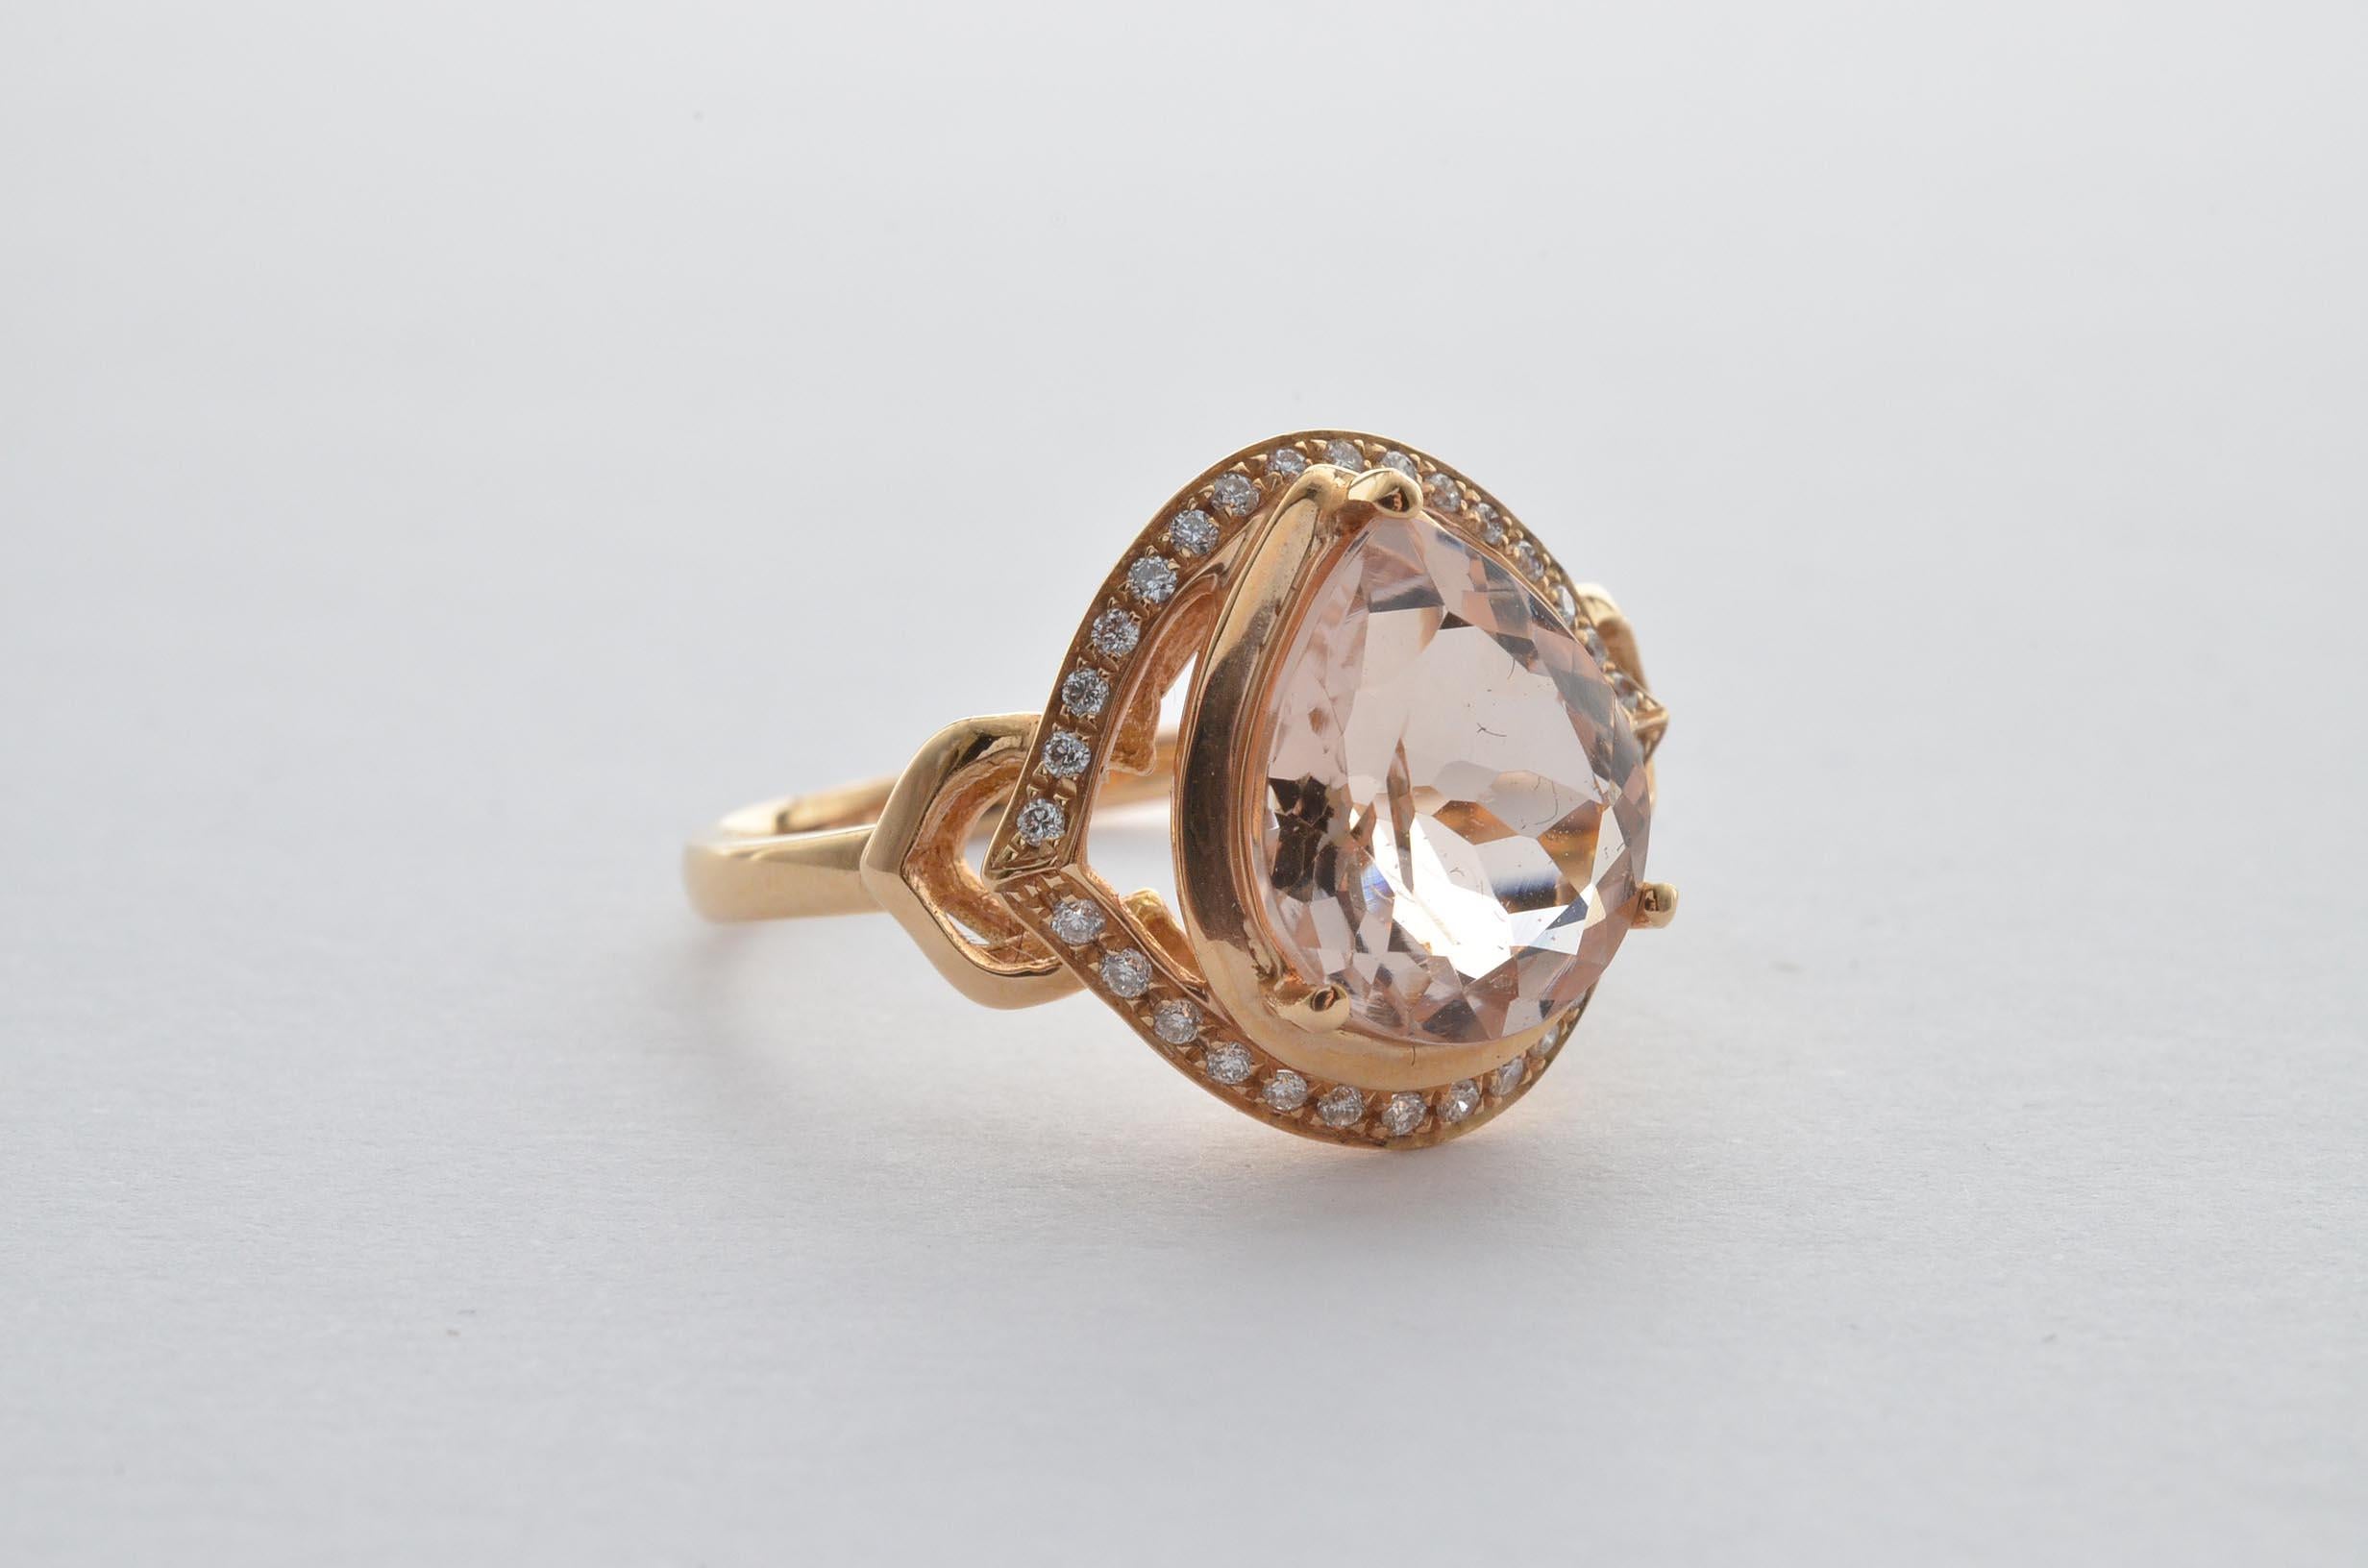 This collection features an array of magnificent morganites! Accented with more morganites and Diamond these rings are made in rose gold and present a classic yet elegant look. 

Classic morganite ring in 18K Rose gold with Diamond. 

Morganite: